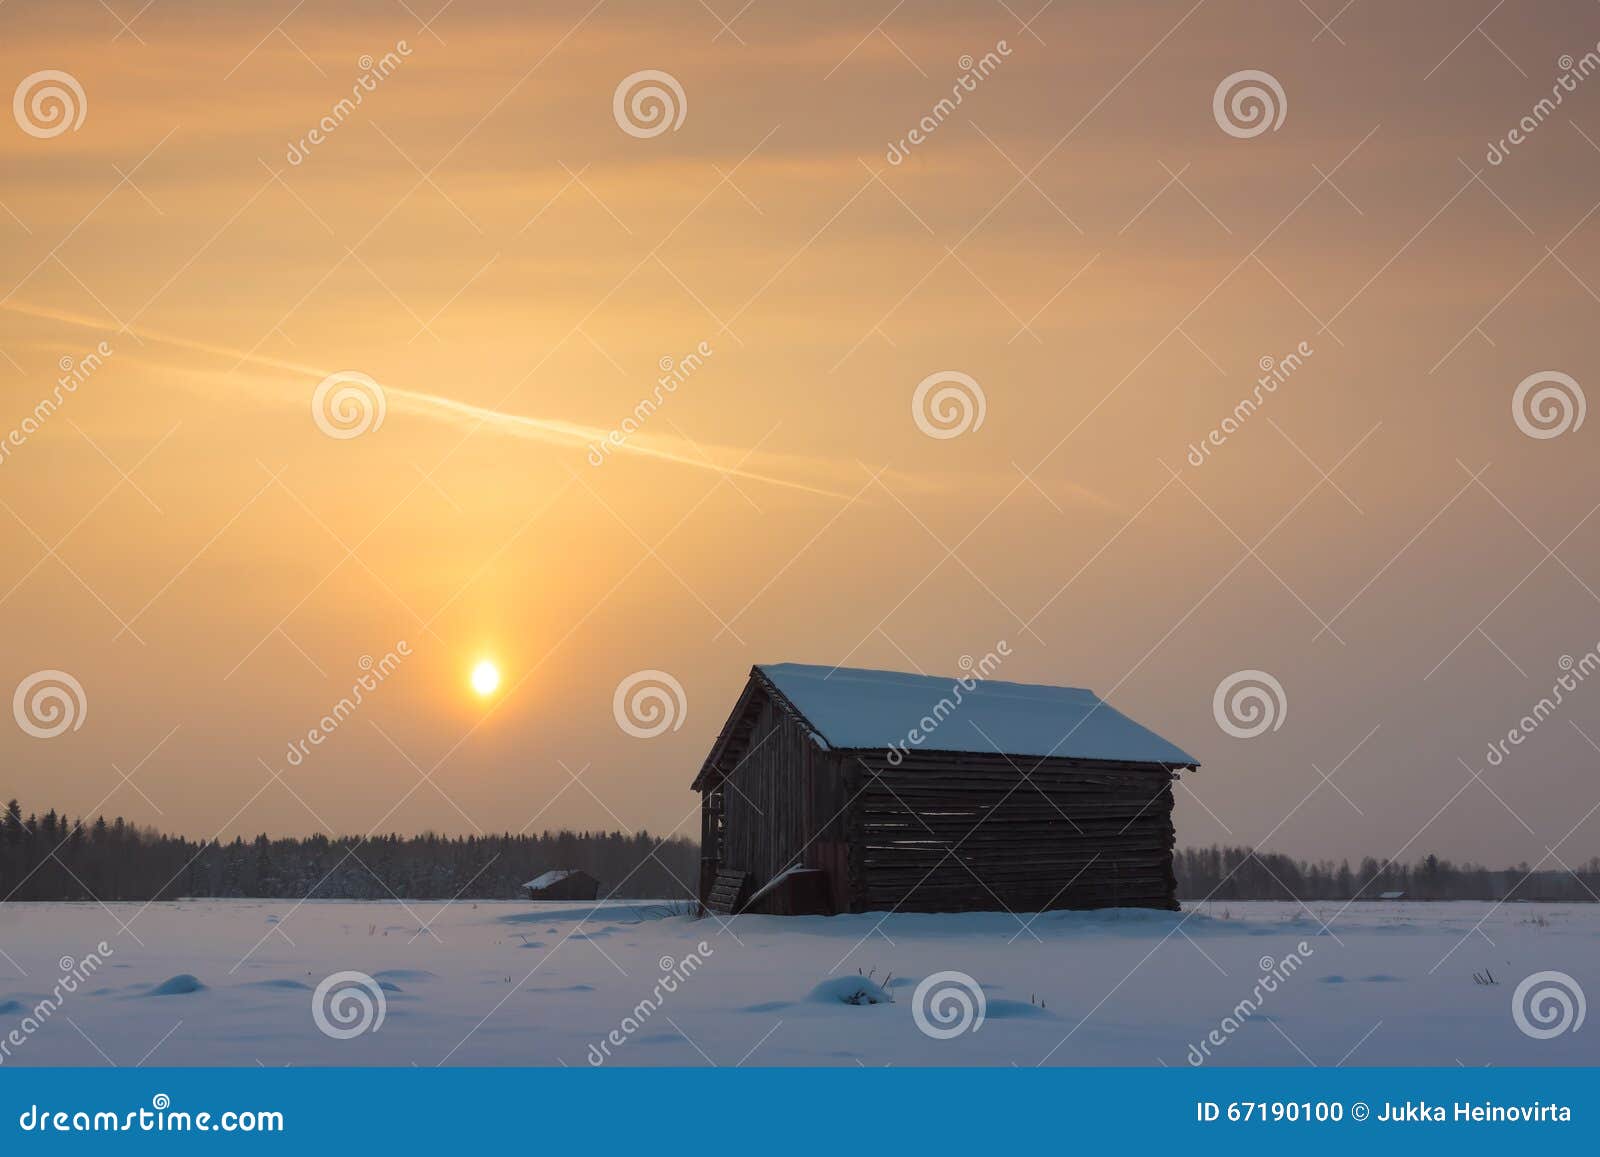 Sunrise On The Snowy Fields Stock Photo Image Of Building Rural